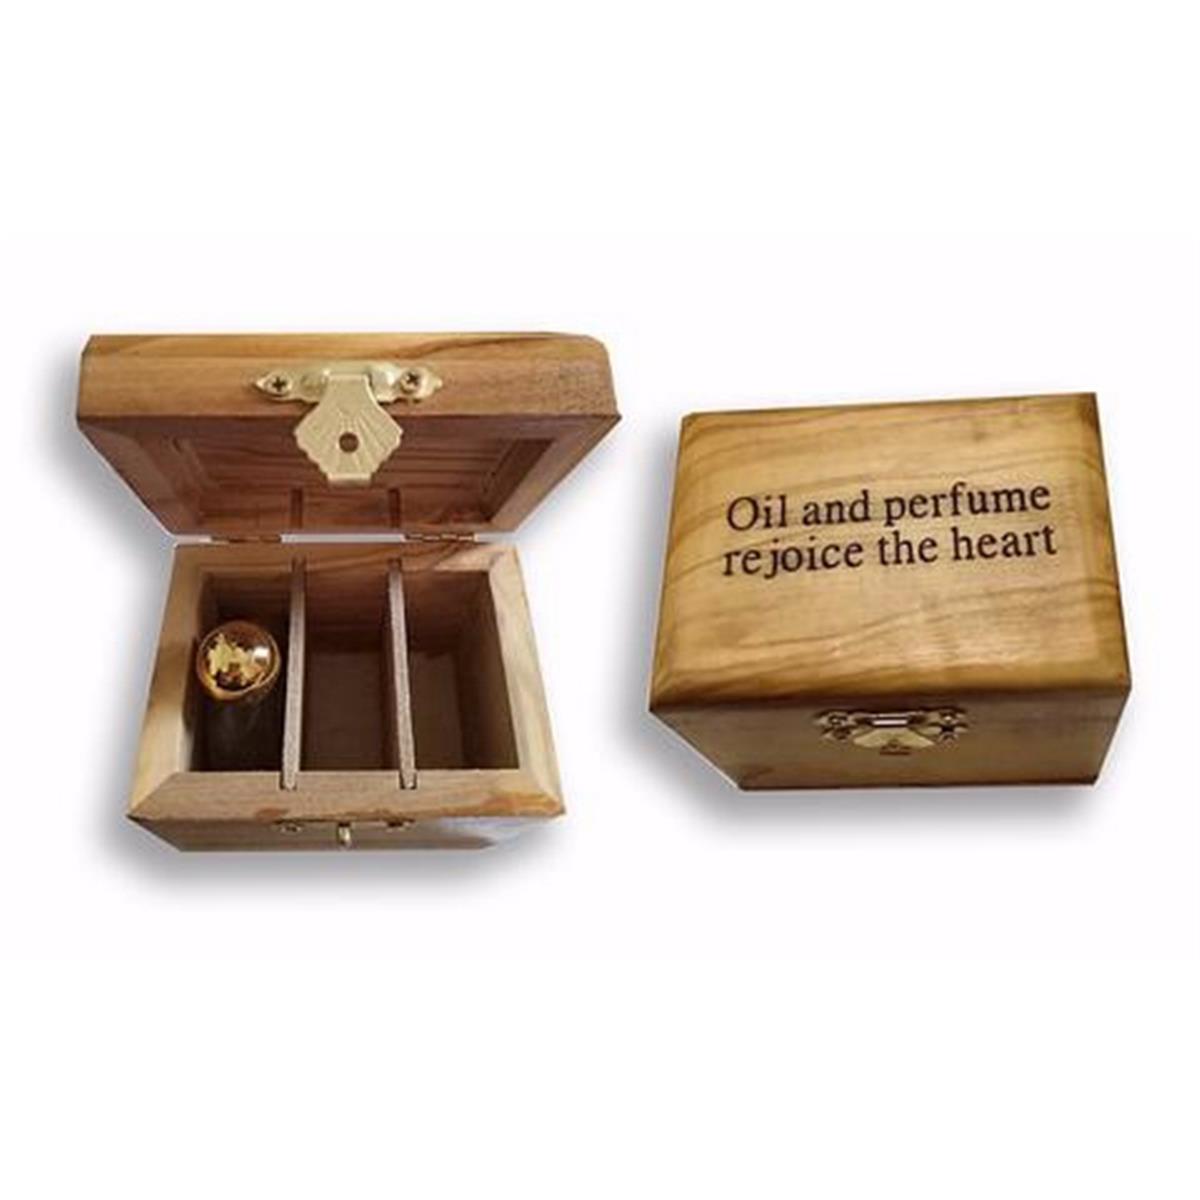 196420 Anointing Oil - Rejoice The Heart In Olivewood Box